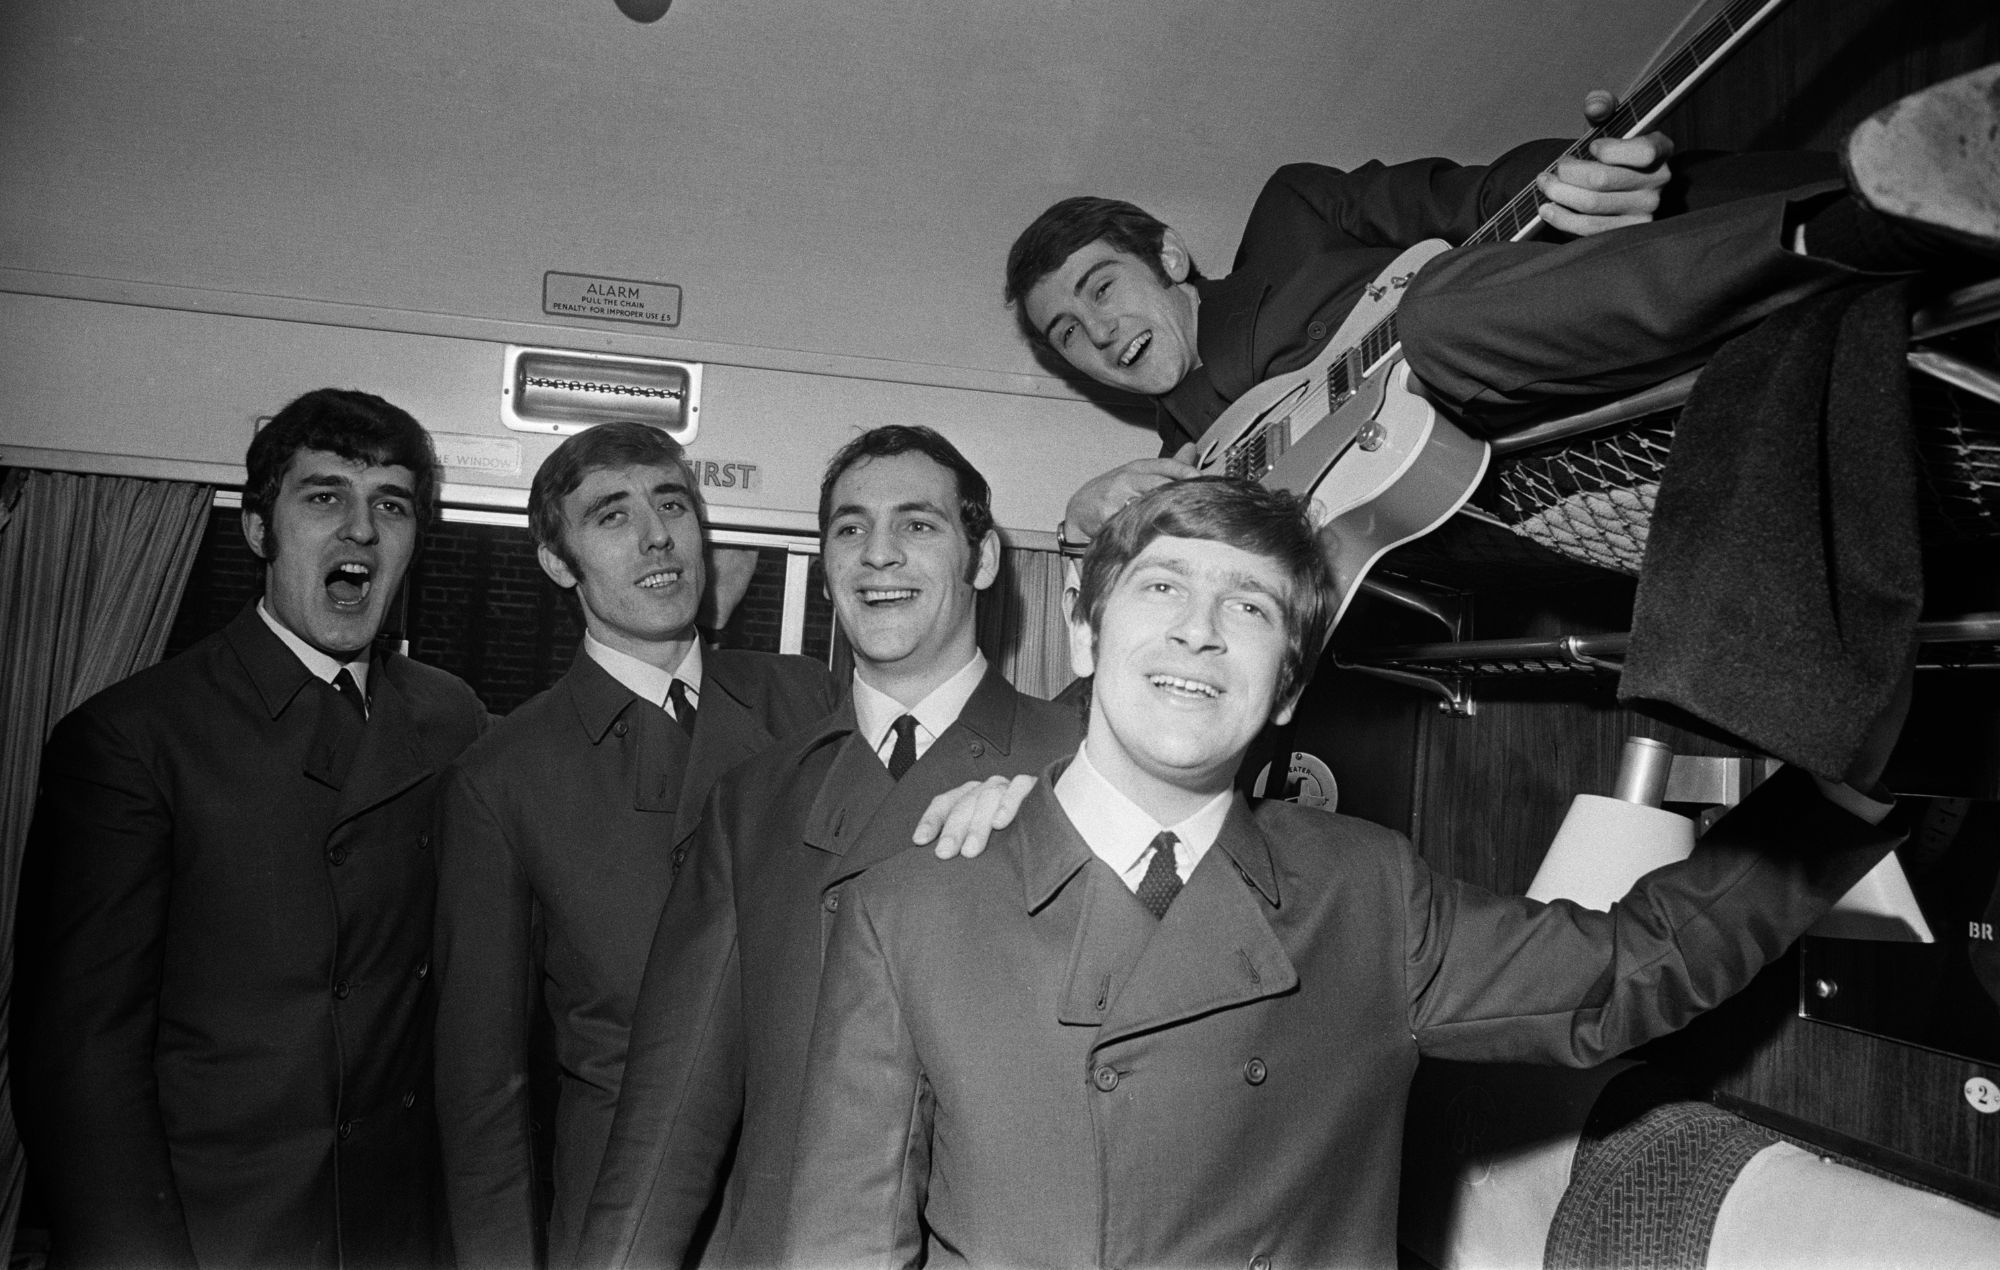 English rock band The Moody Blues pose for a photograph in a first class carriage on a train, 11th November 1964. Left to right : Ray Thomas, Clint Warwick, Mike Pinder, Graeme Edge, and Denny Laine (on shelf).